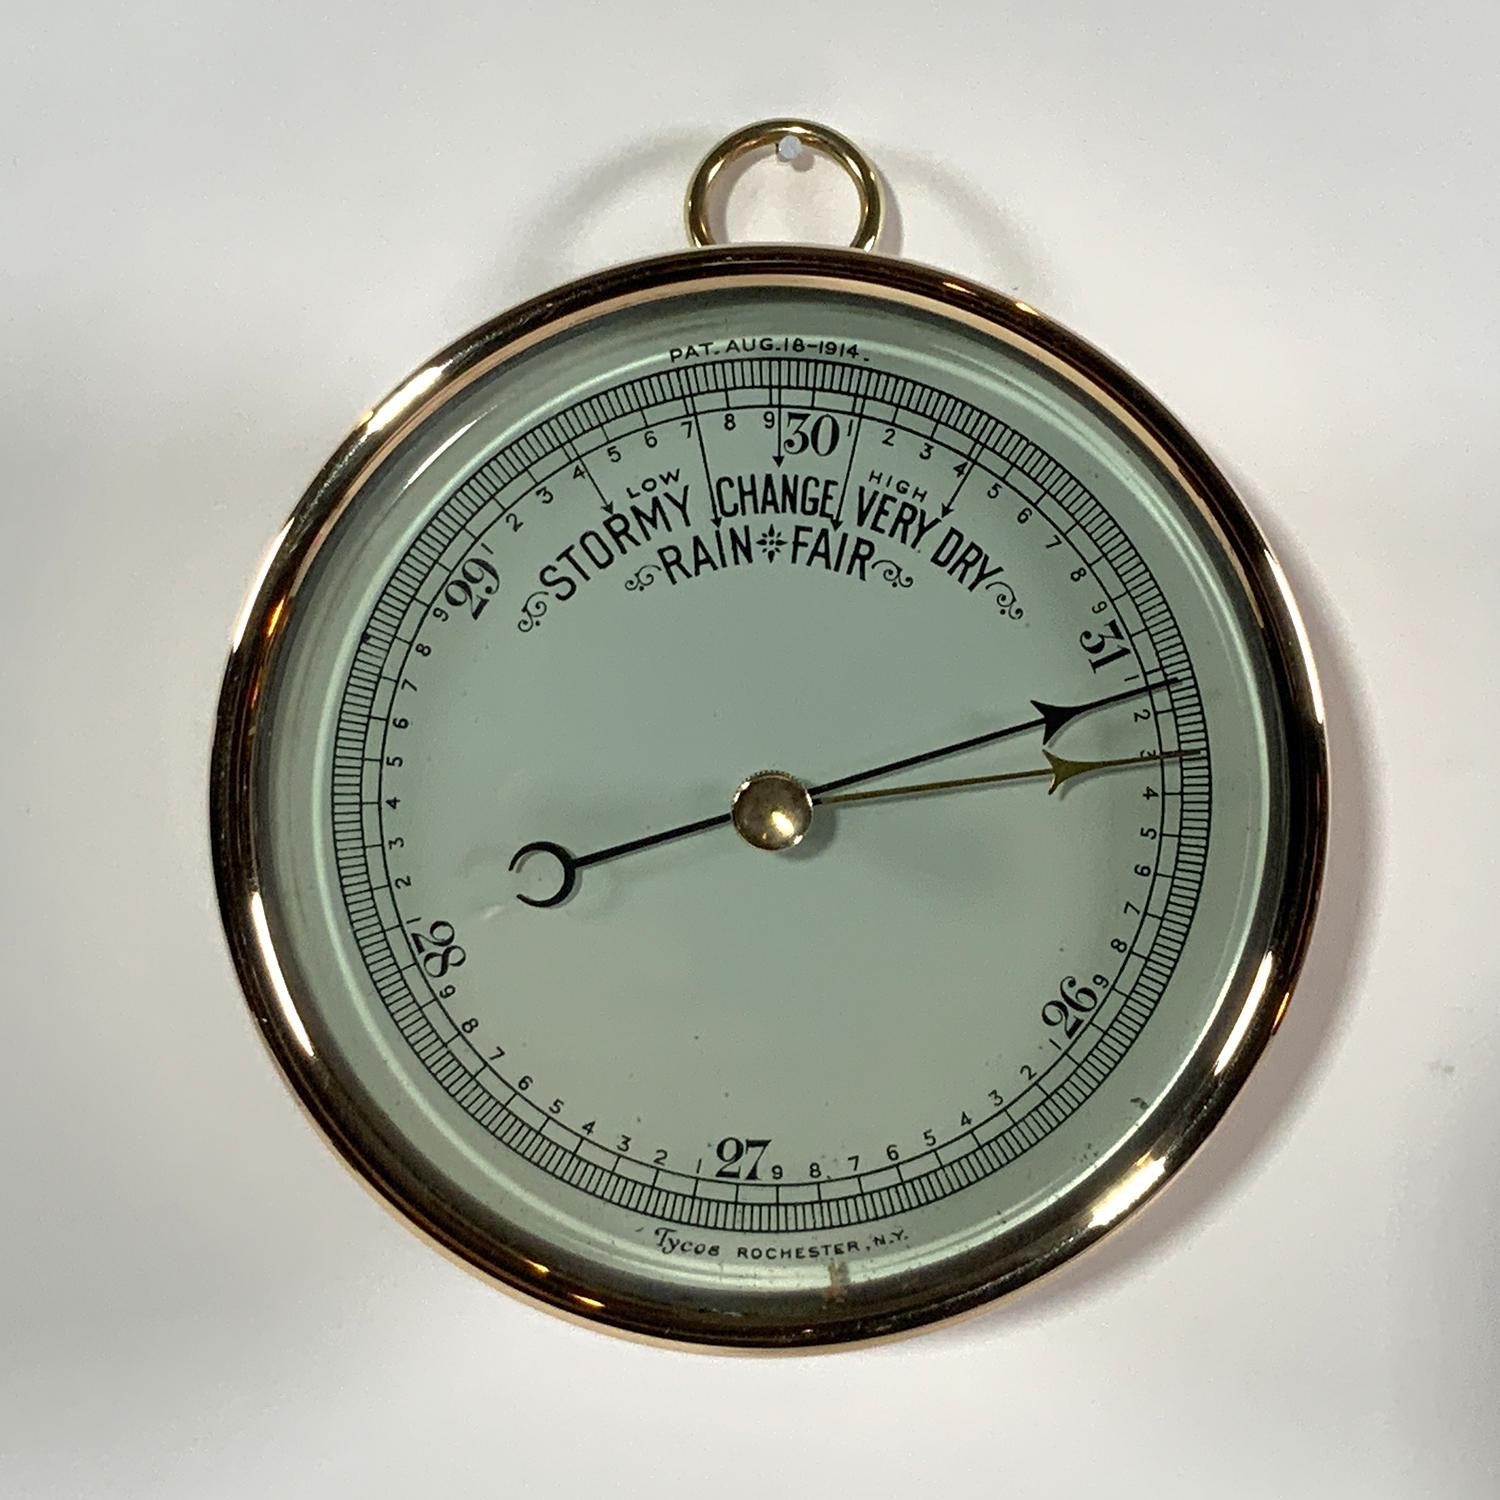 Brass barometer by Taylor of Rochester, NY. Patent date of August 18, 1914. Face is printed 